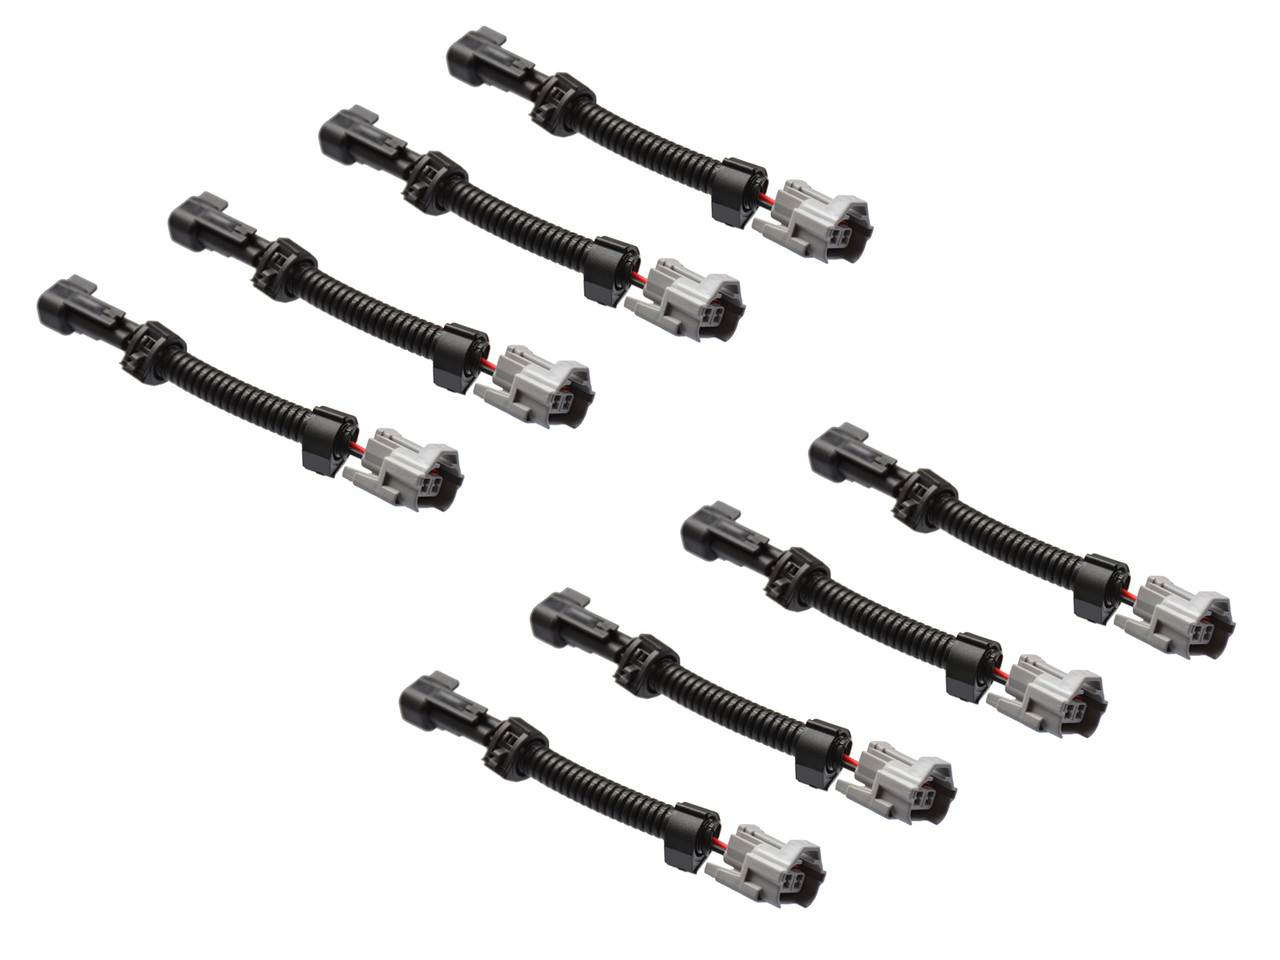 EV6 to Denso Fuel Injector Adapter Connector Plug and Play adapter harness